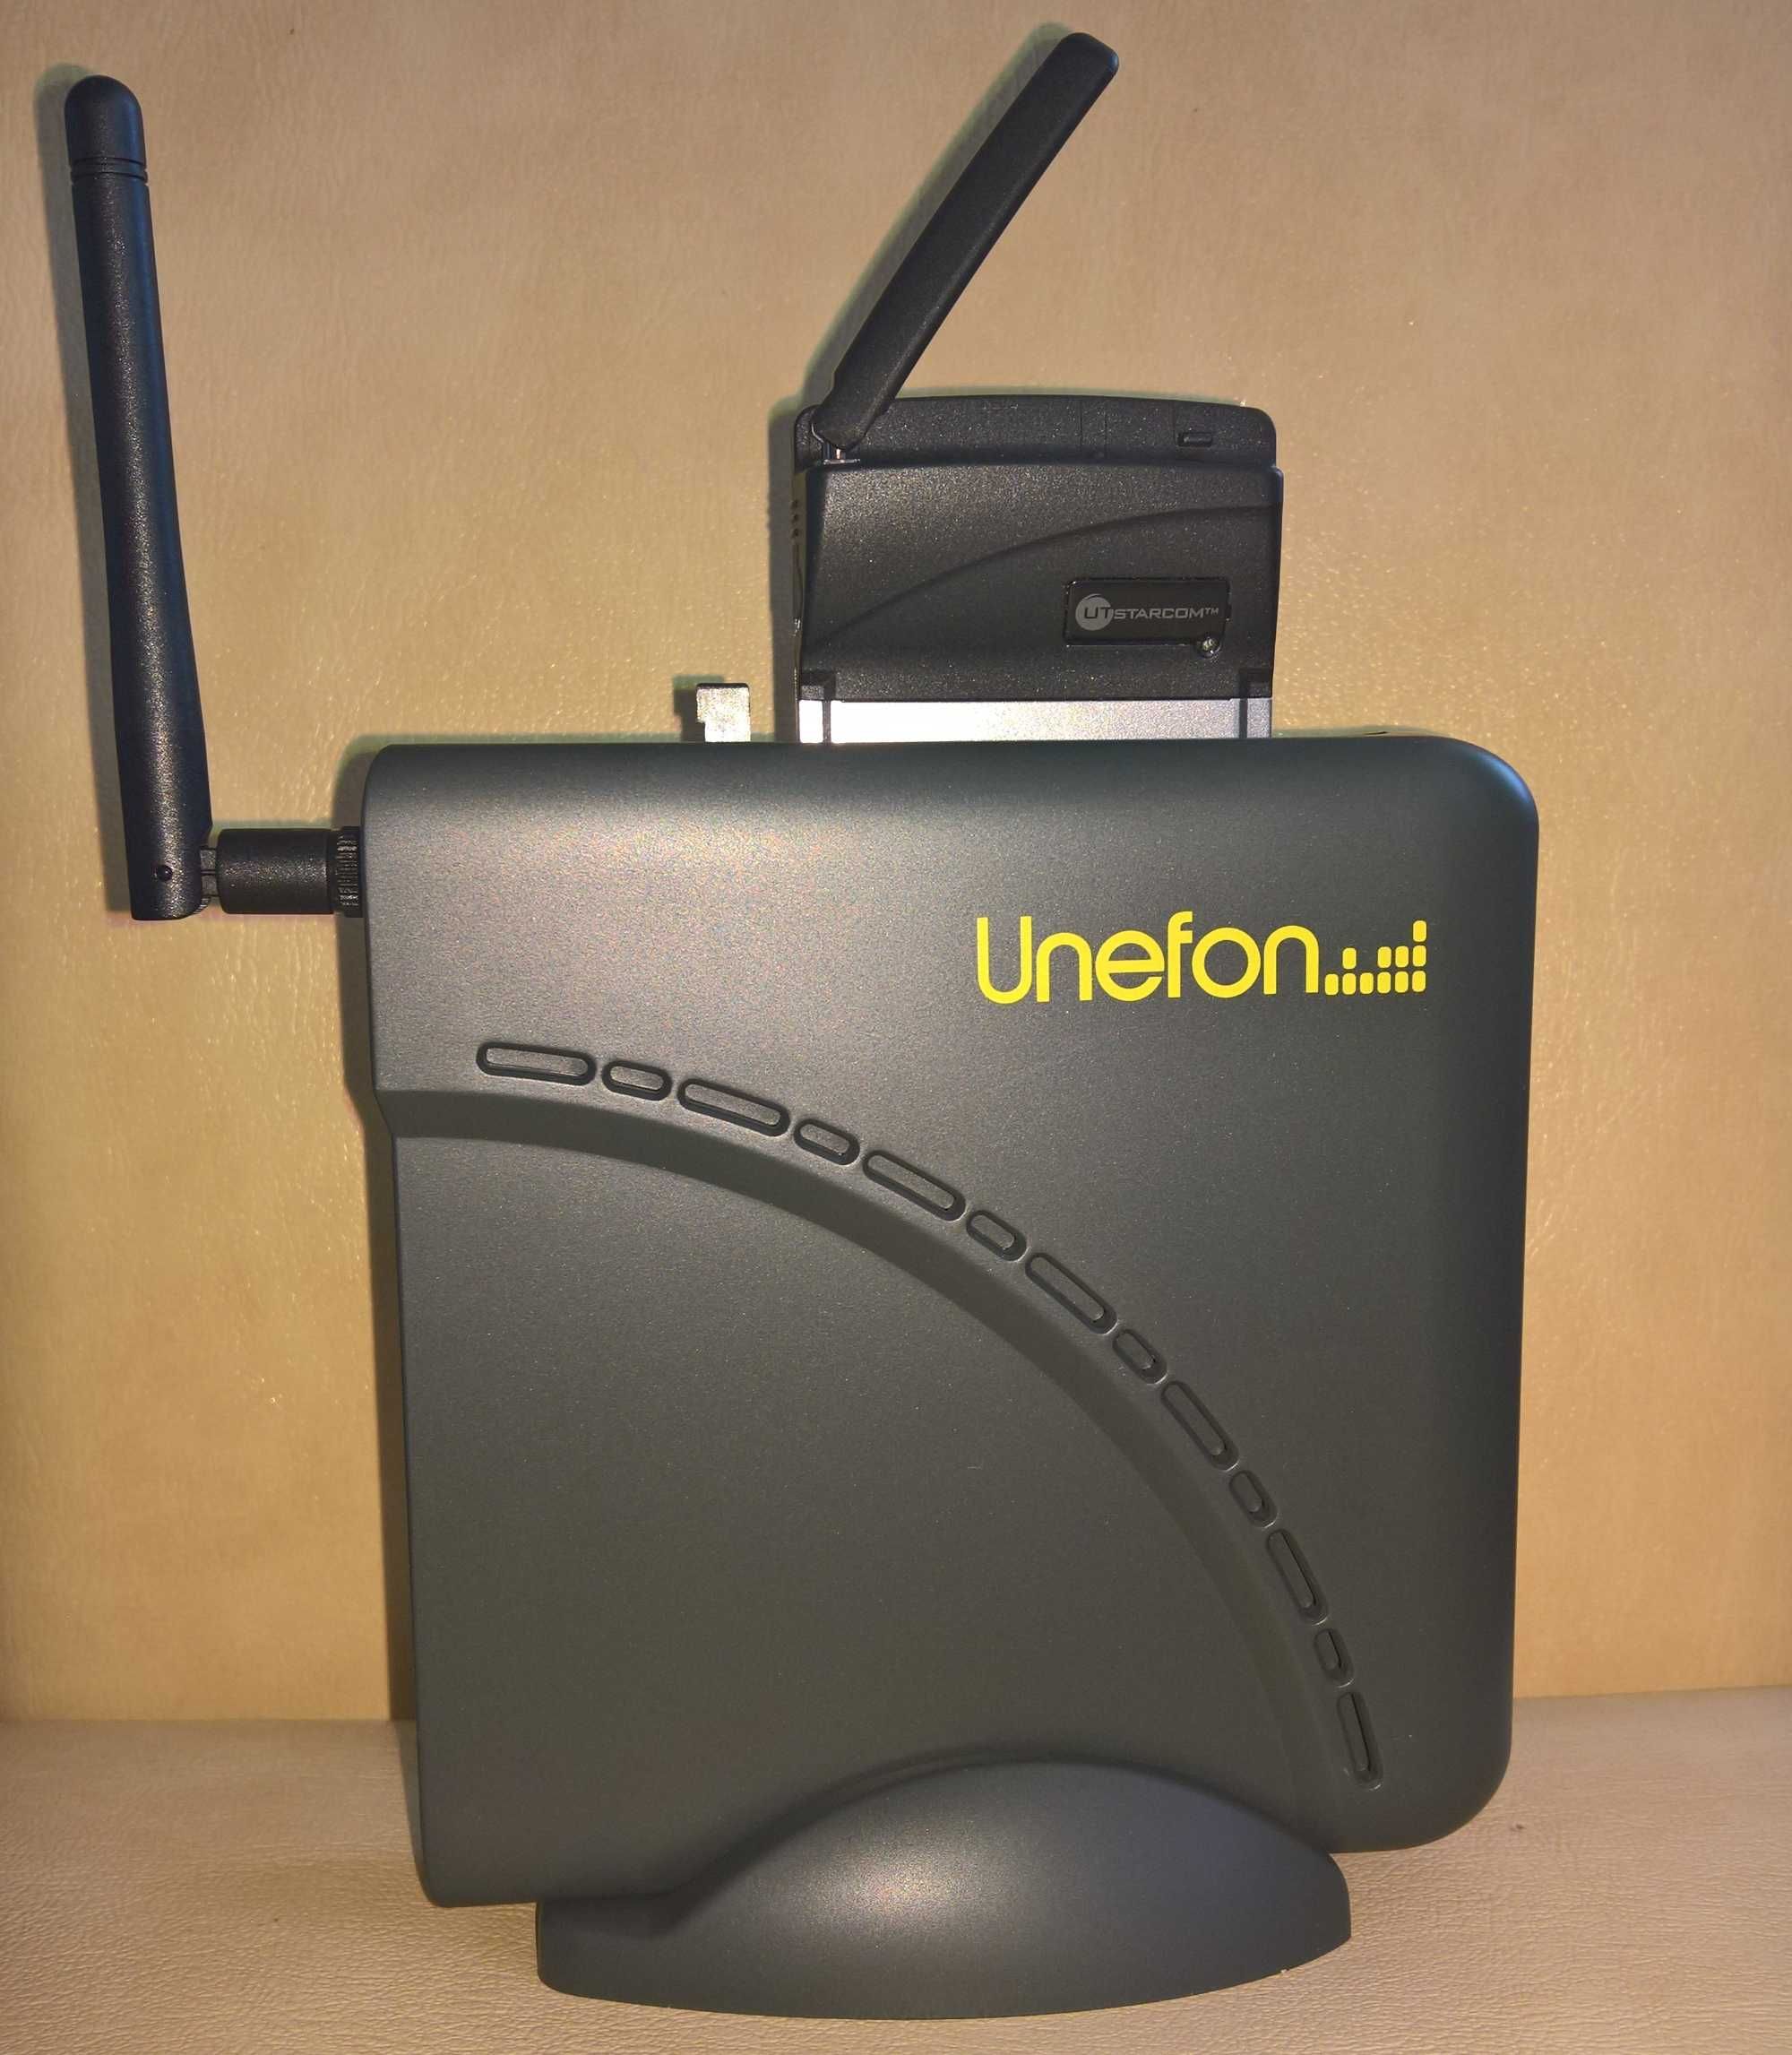 UNEFON MX-001 USB+PCMCAI (WiFi Router USB for 4G/3G modem) NEW in BOX